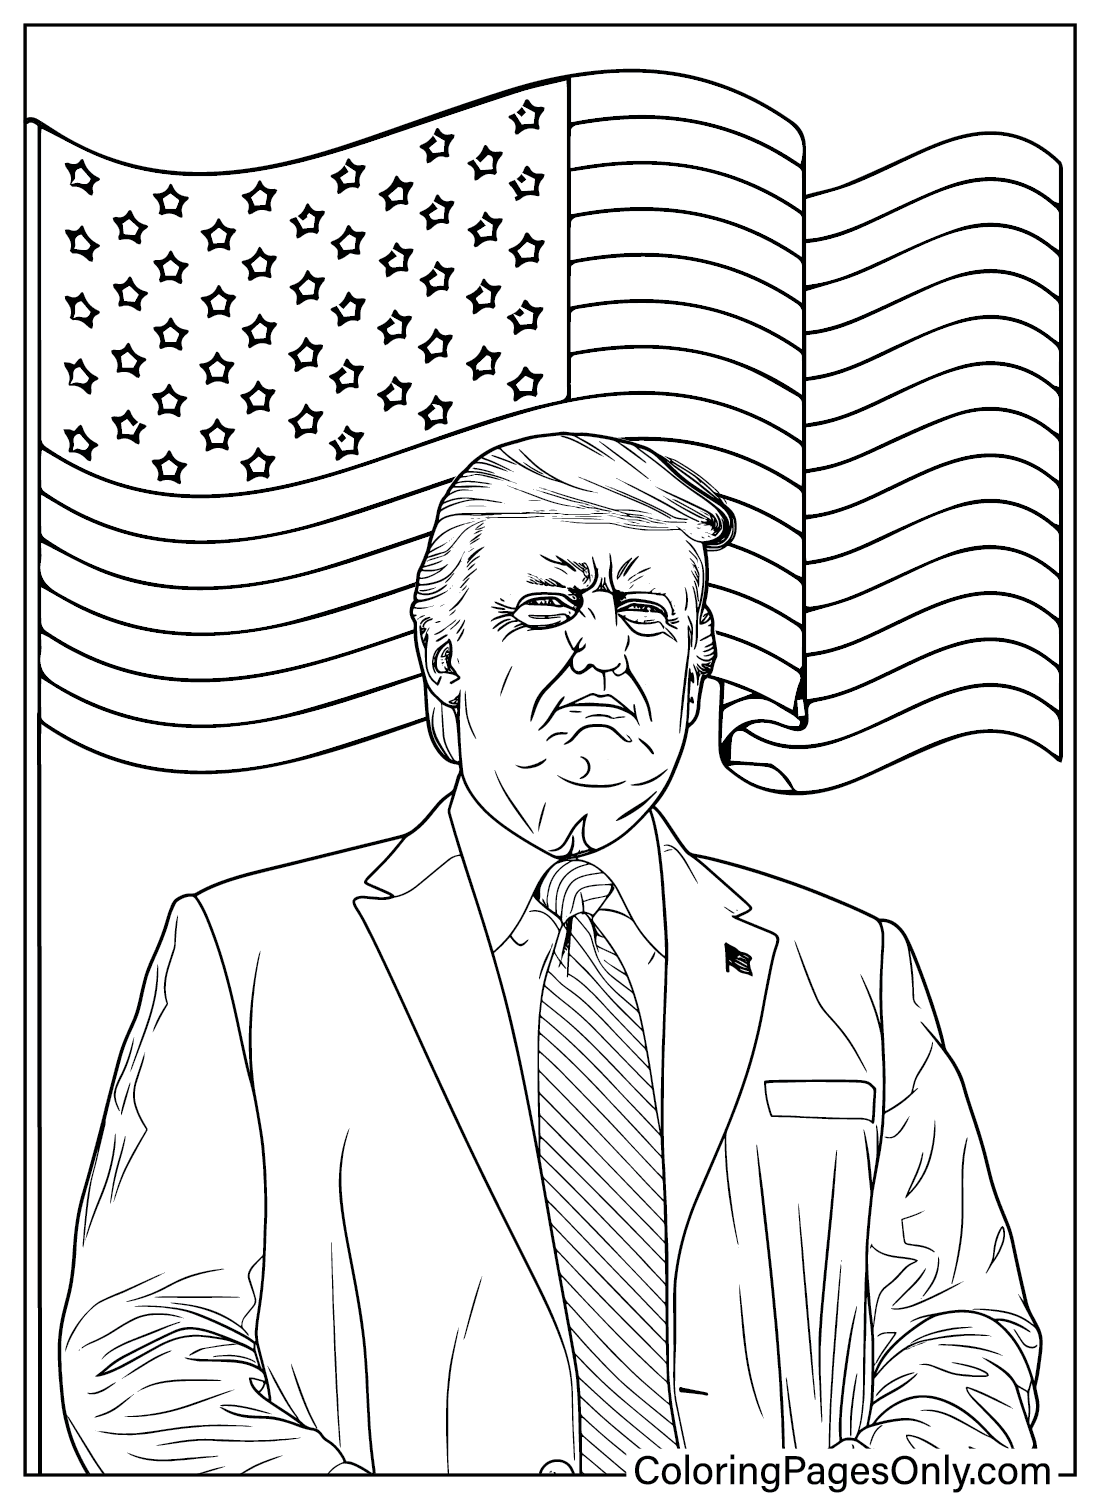 Donald Trump Picture to Color from Donald Trump